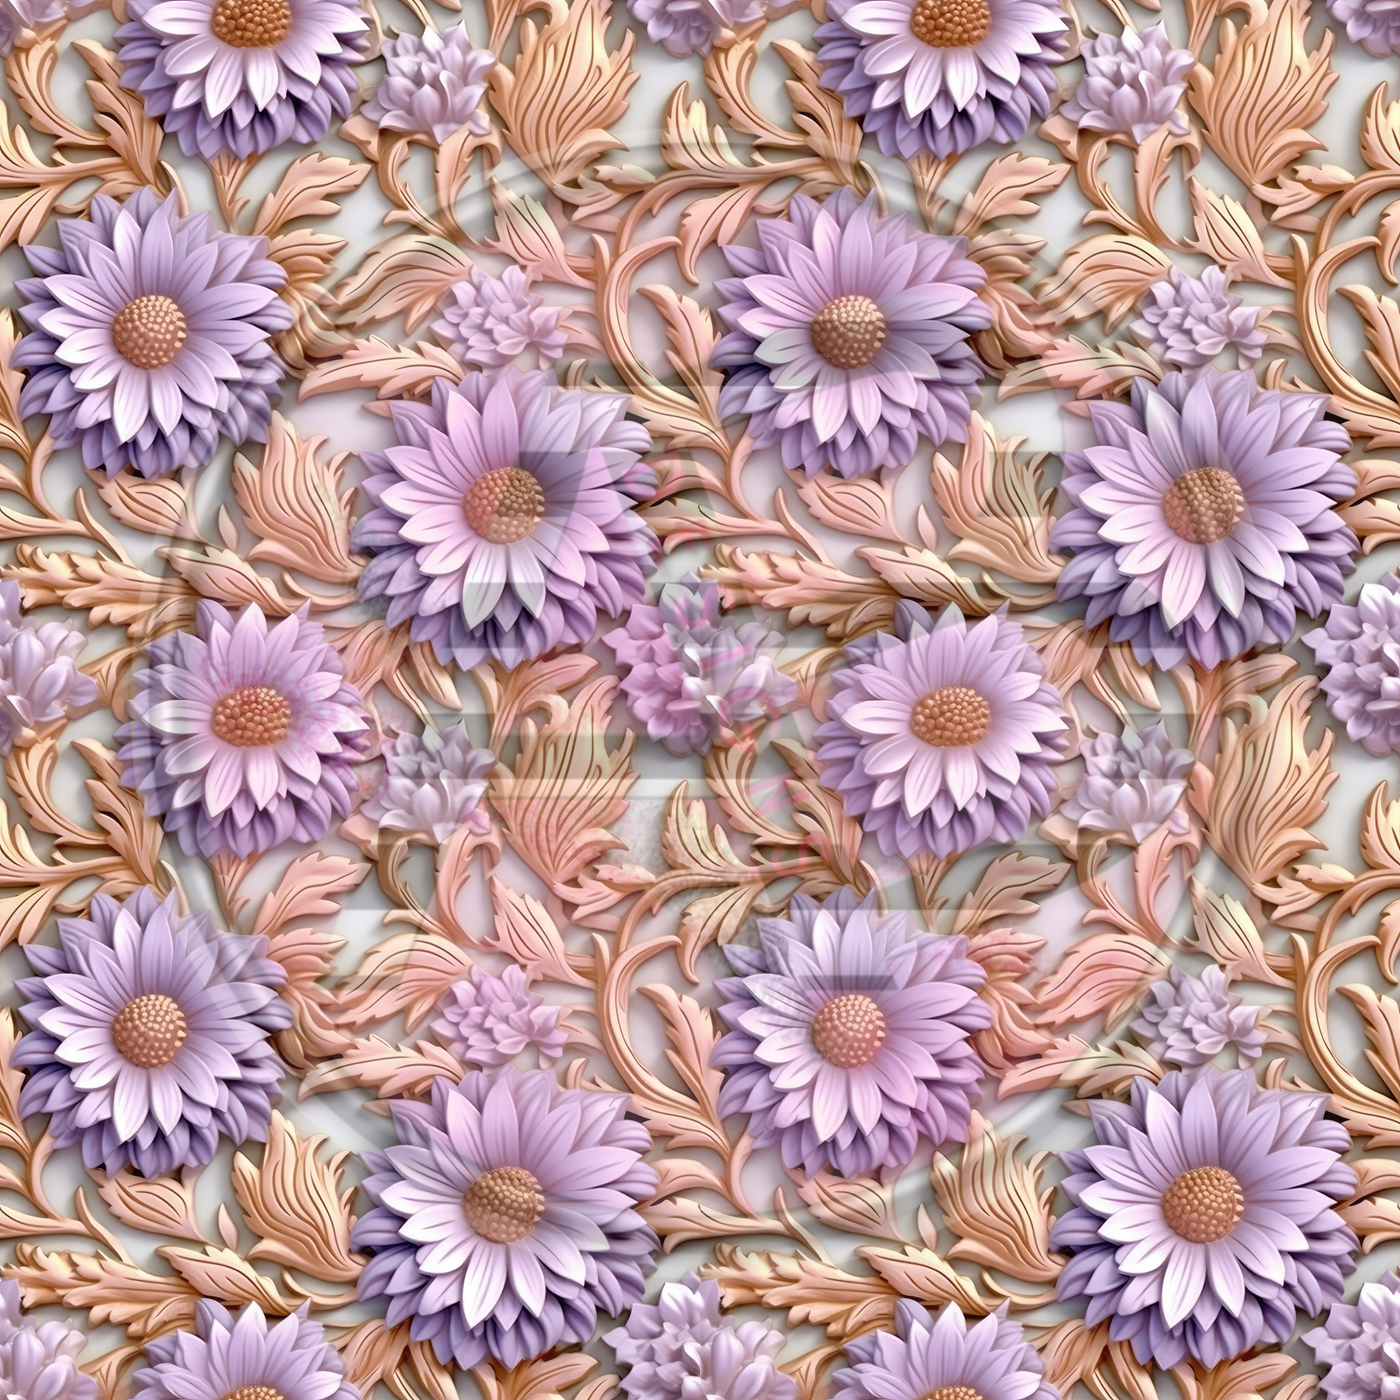 Adhesive Patterned Vinyl - 3D Floral 05 Smaller